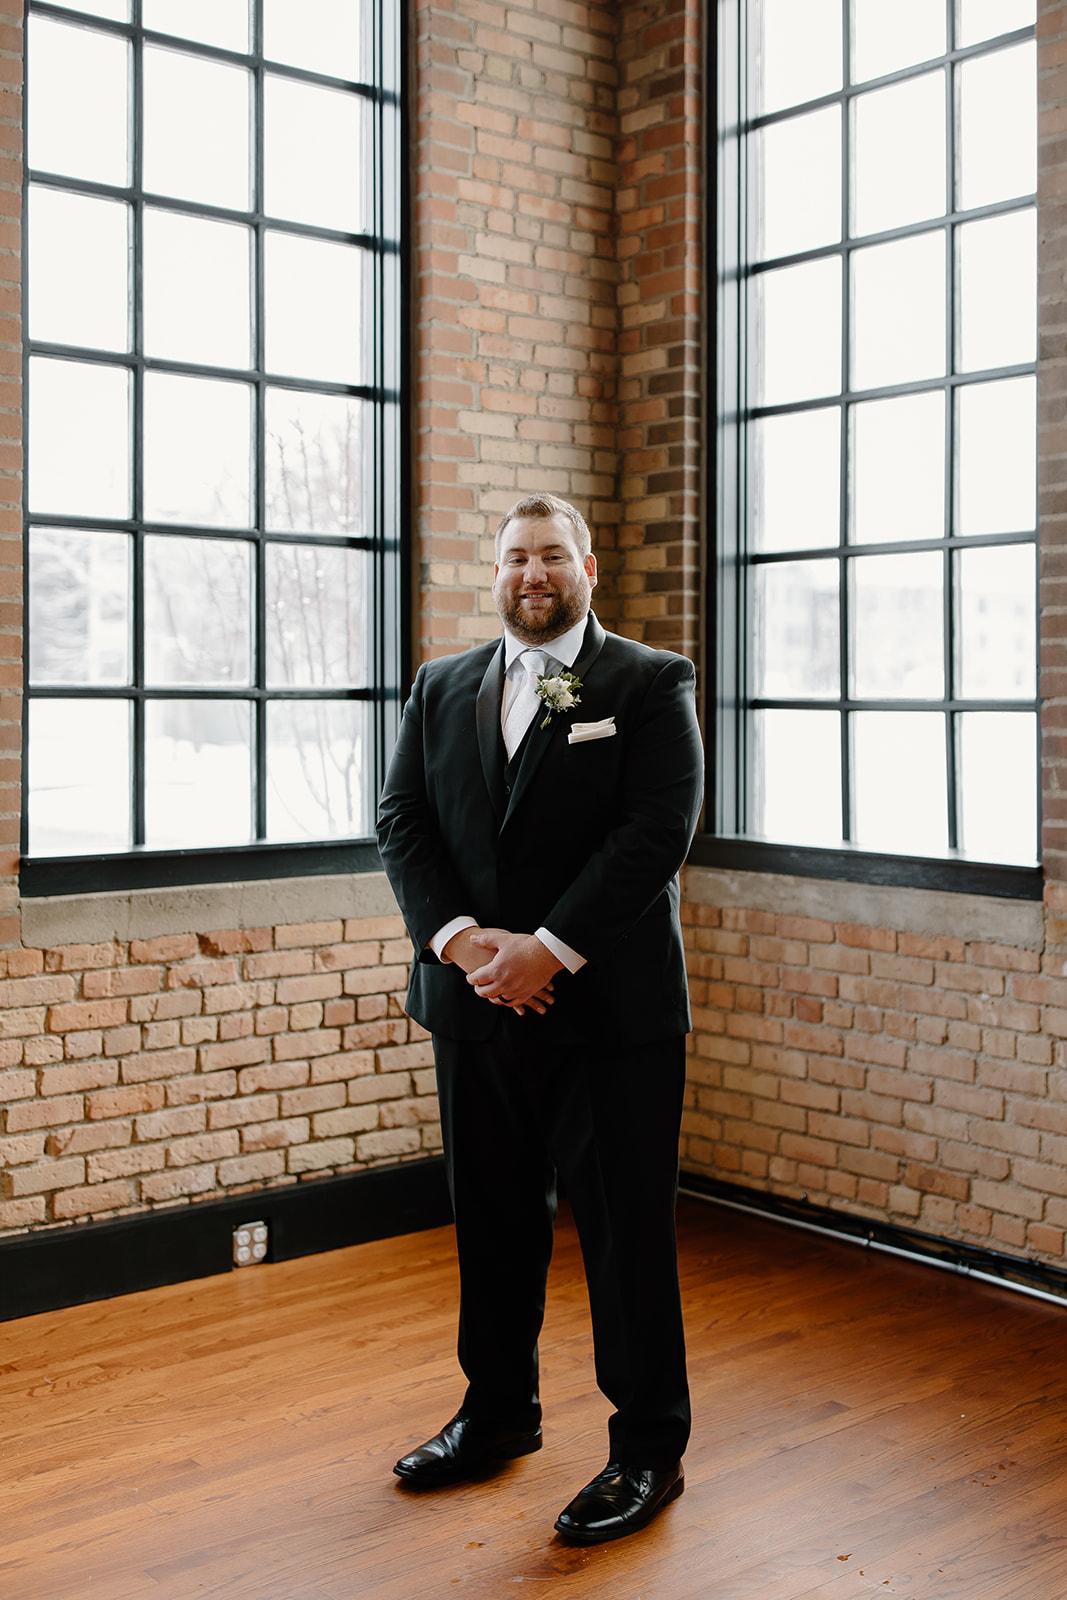 Groom smiling in front of windows